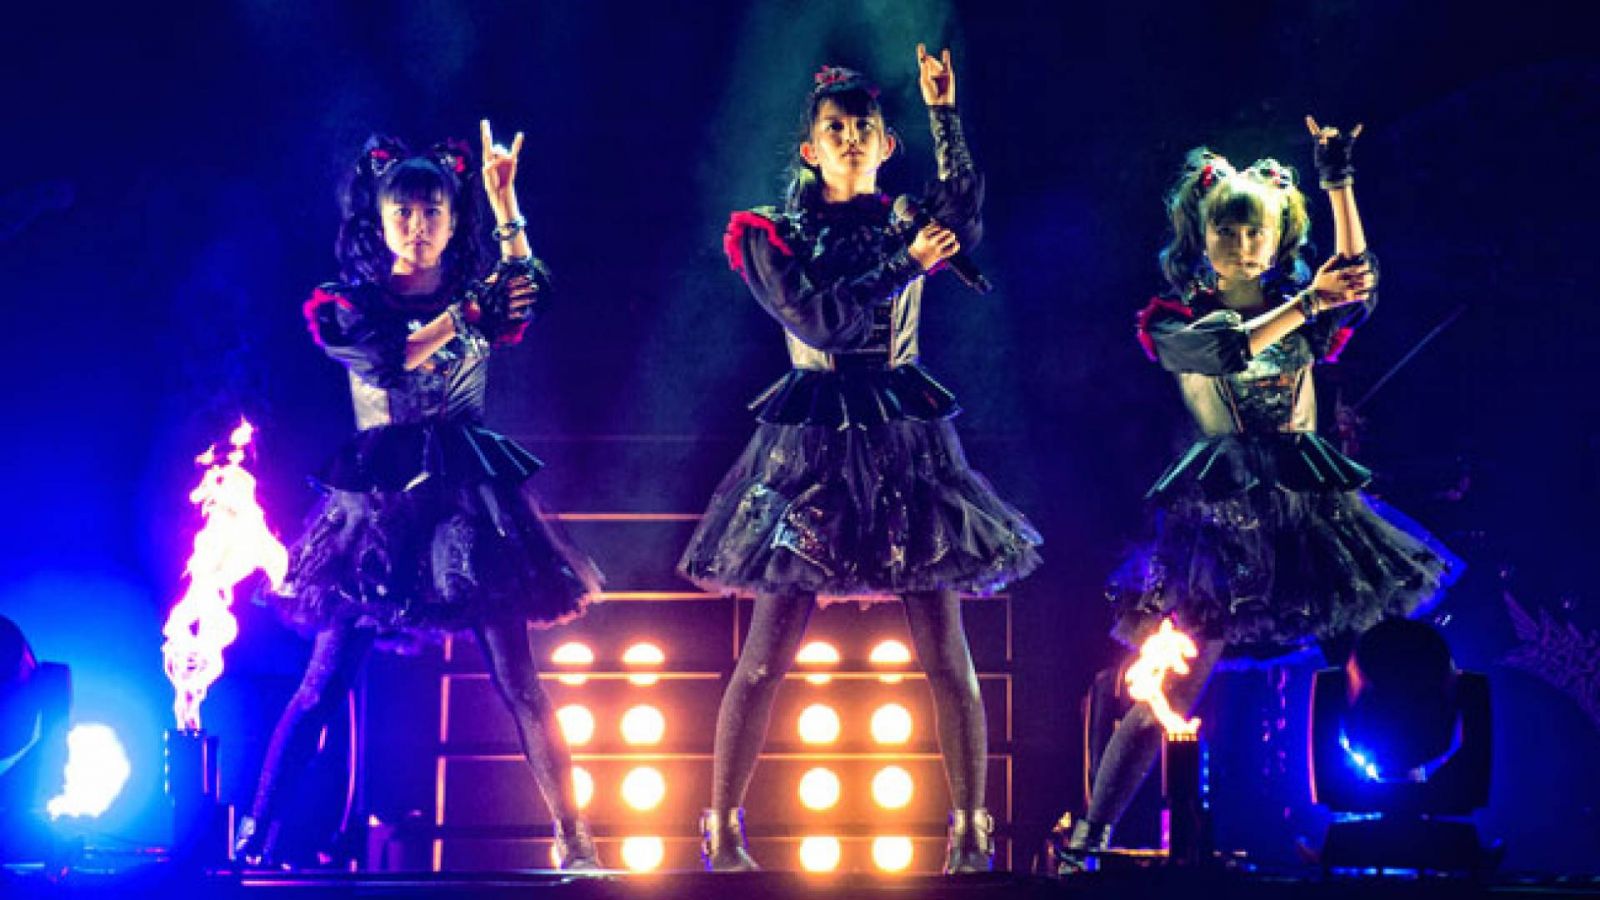 BABYMETAL in The SSE Arena, Wembley © Amuse Inc.